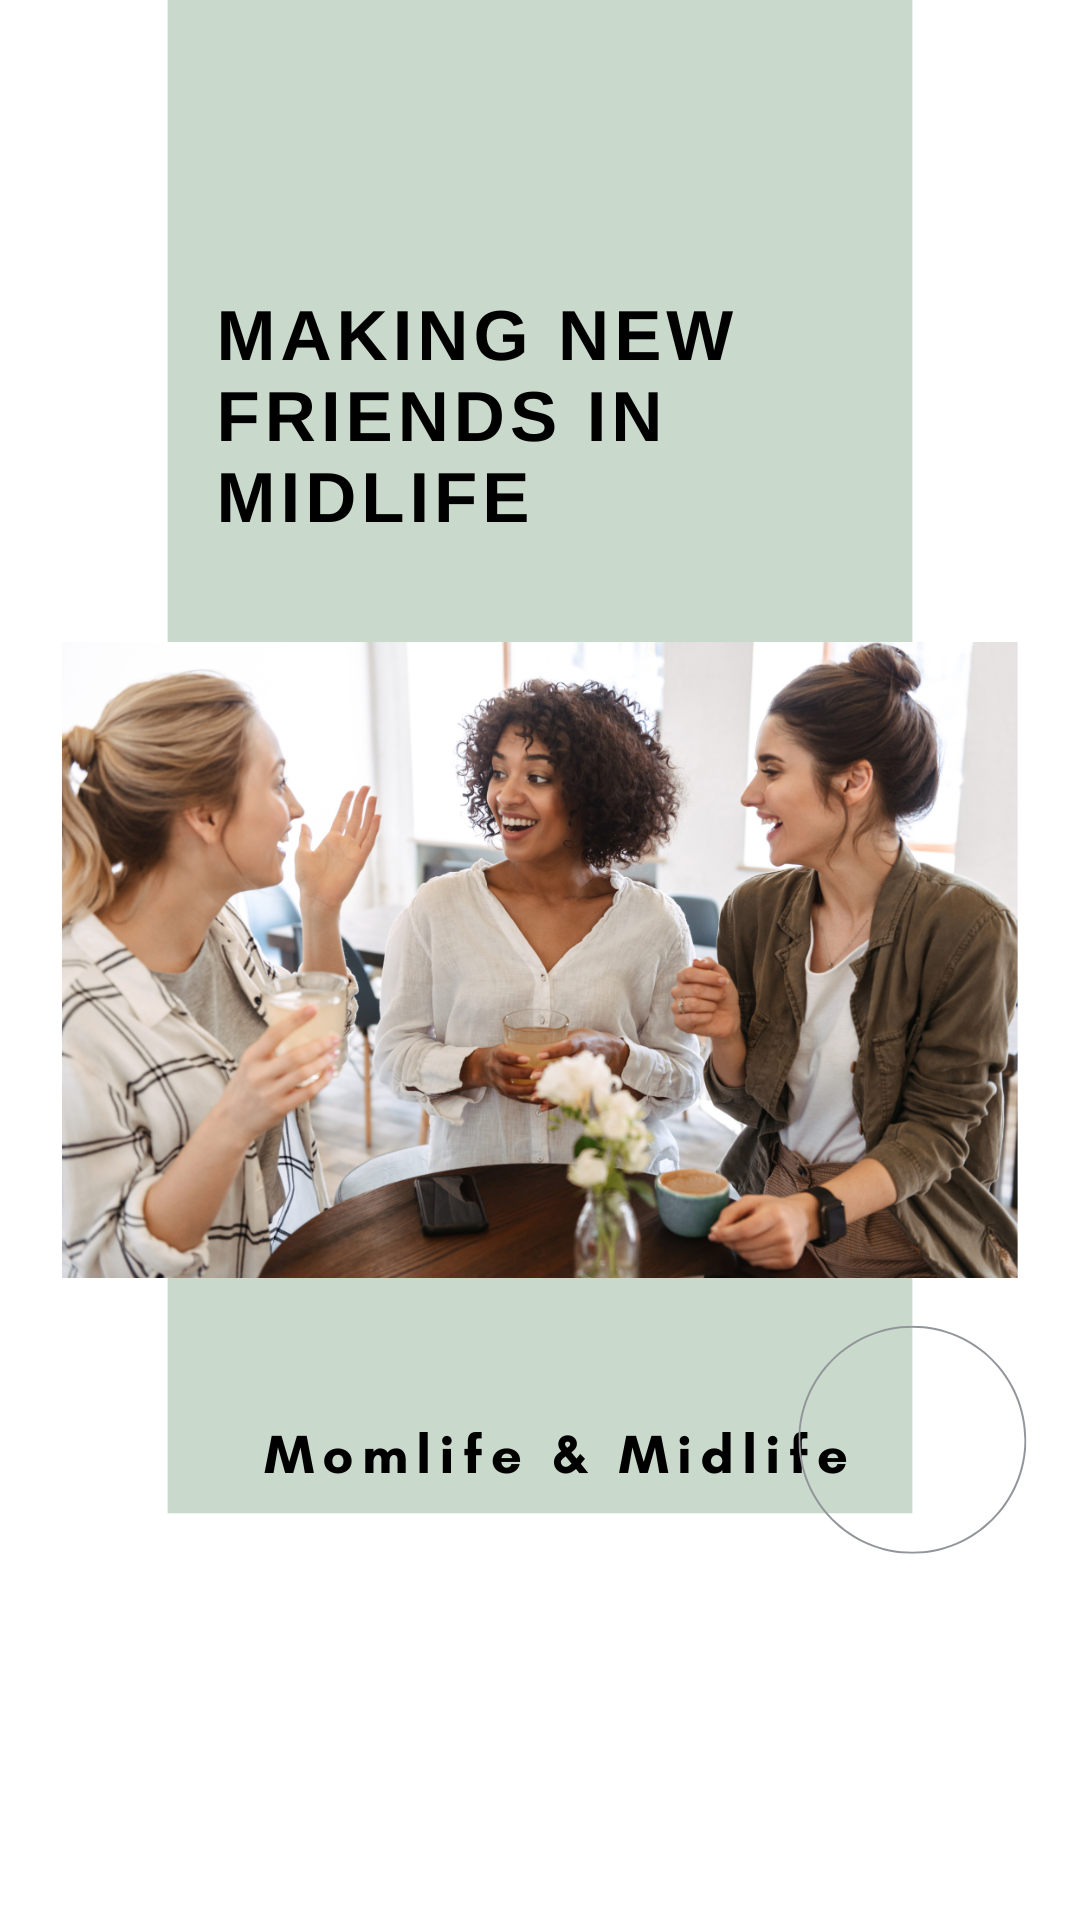 picture of women friends blowing confetti from their hands, making friends as an adult, how to make friends when you have none, how to make friends in your 40s, how to make female friends in your 40s, why is it hard to make friends over 30